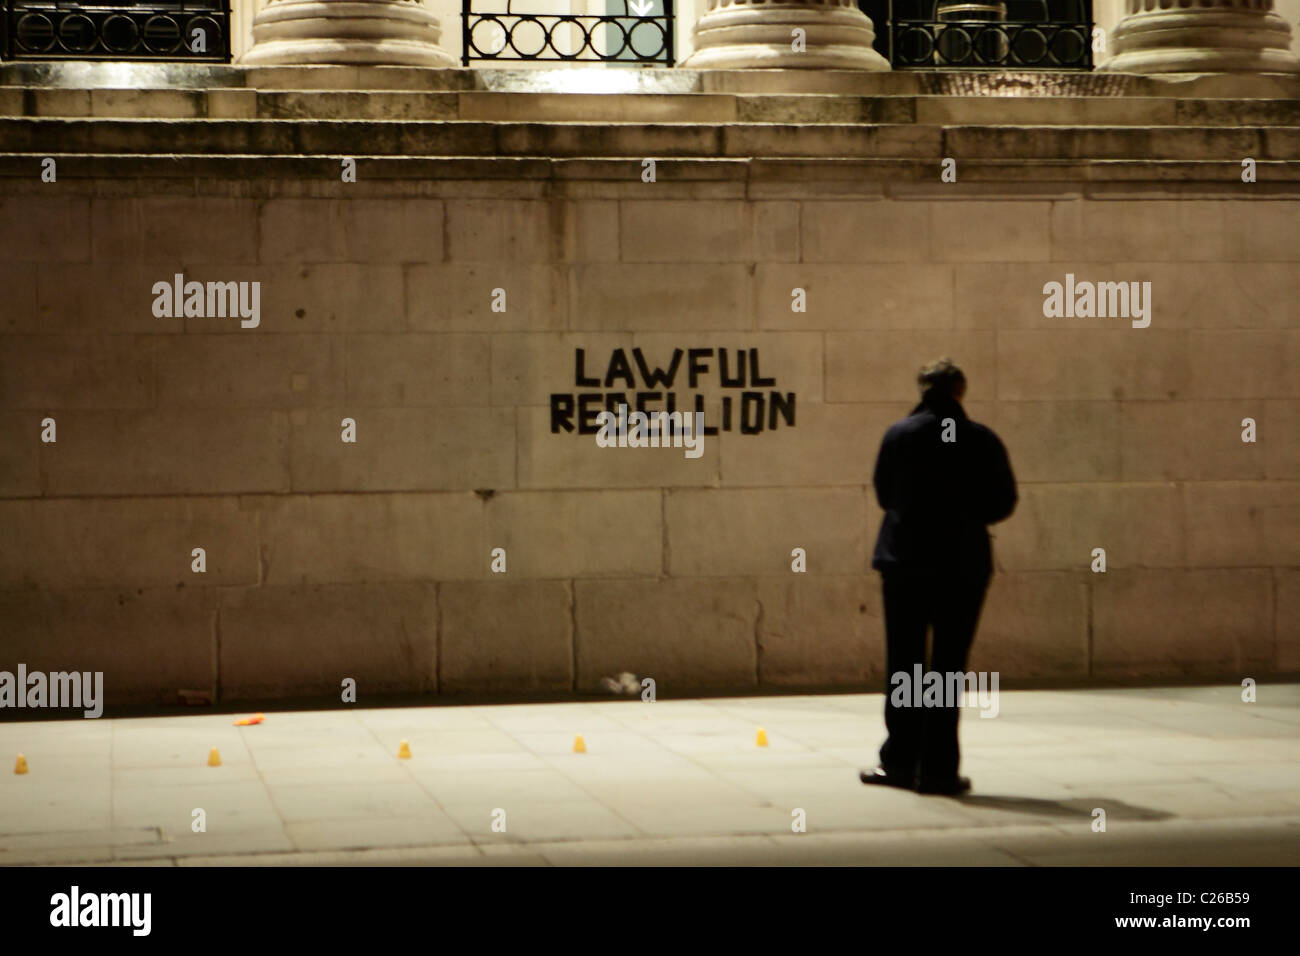 Lawful Rebellion graffiti on the wall of a building in Trafalgar Square Stock Photo